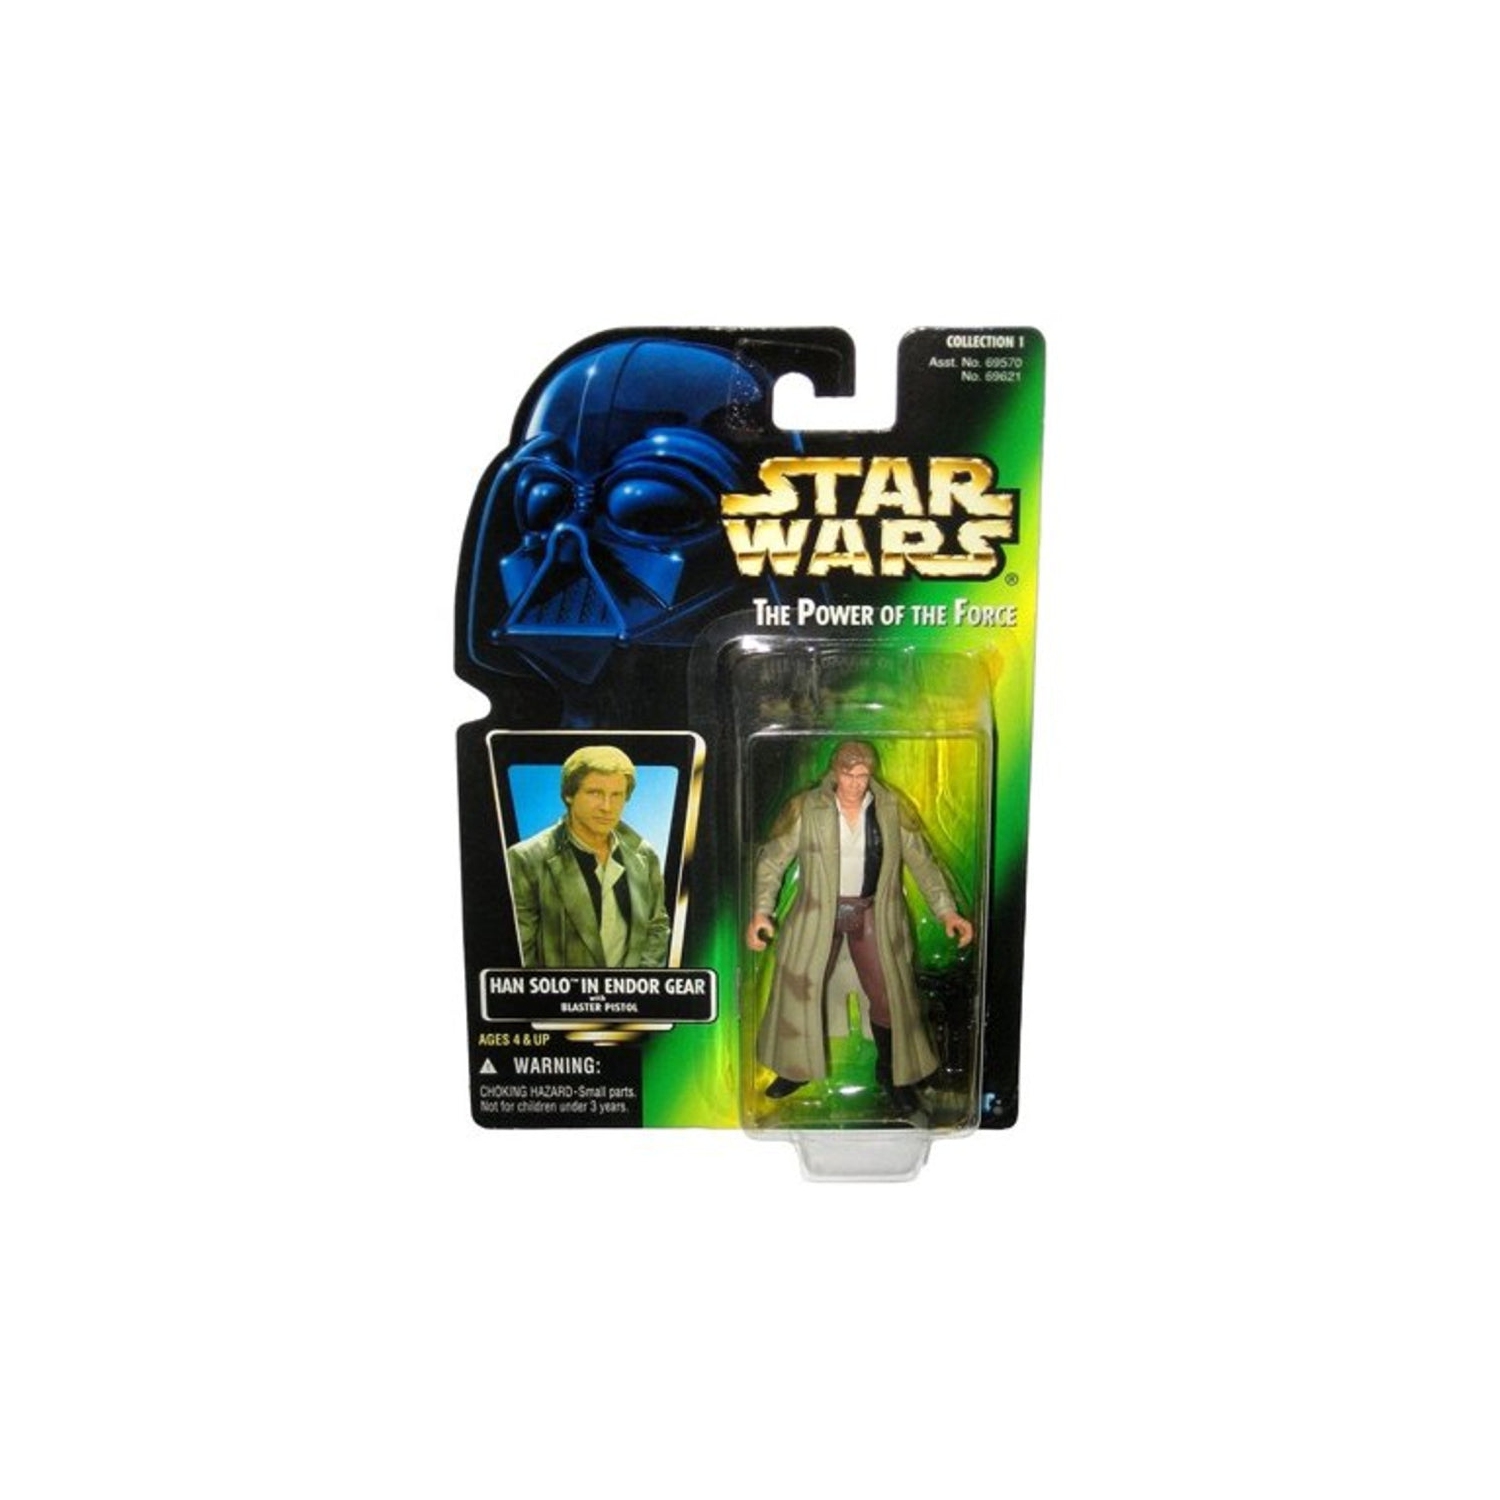 Star Wars Power of the Force Freeze Frame Han Solo in Endor Gear Action Figure